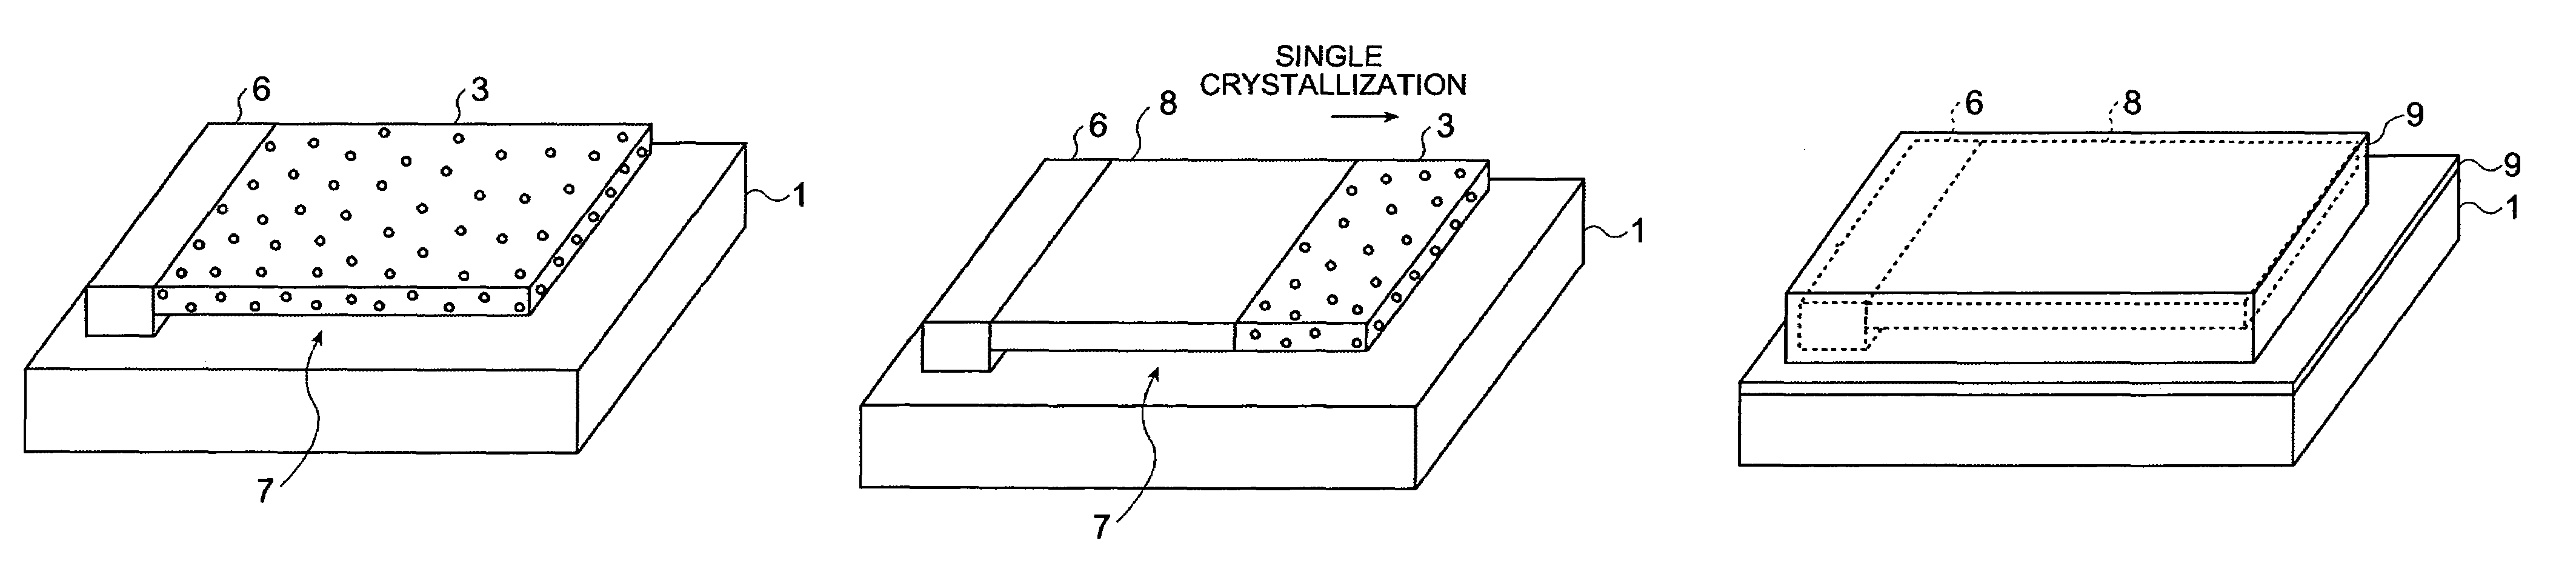 Semiconductor substrate, semiconductor device, method of manufacturing semiconductor substrate, and method of manufacturing semiconductor device